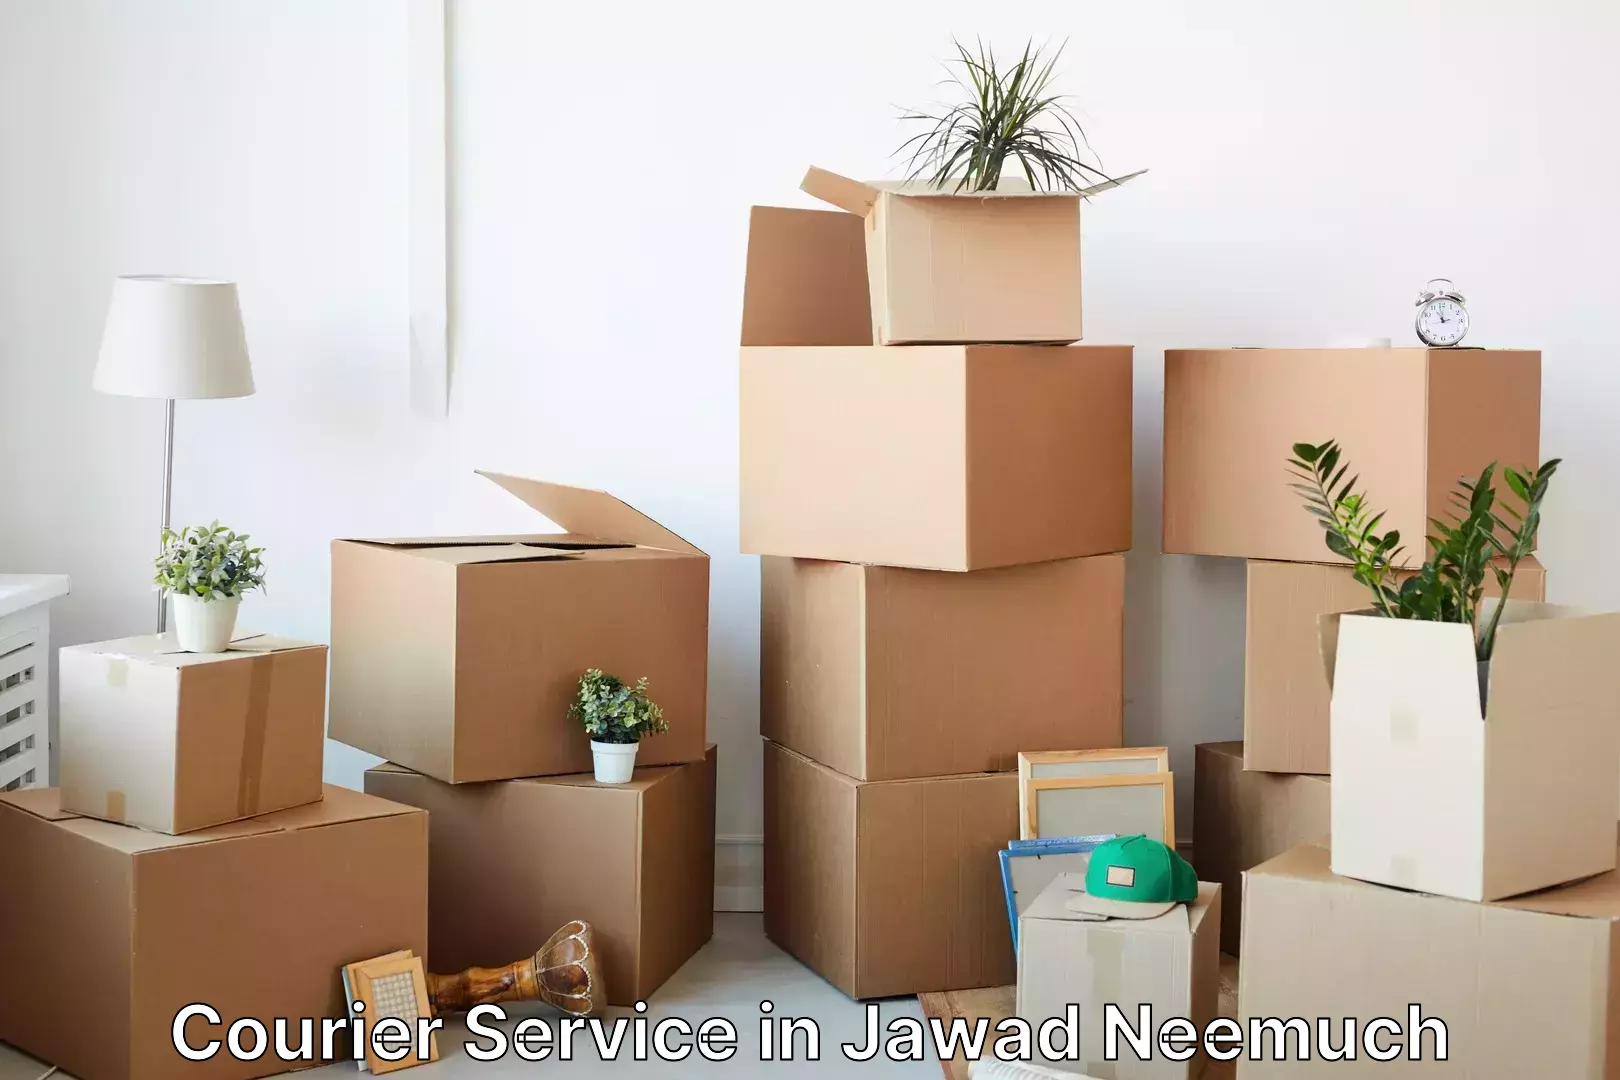 24-hour courier services in Jawad Neemuch